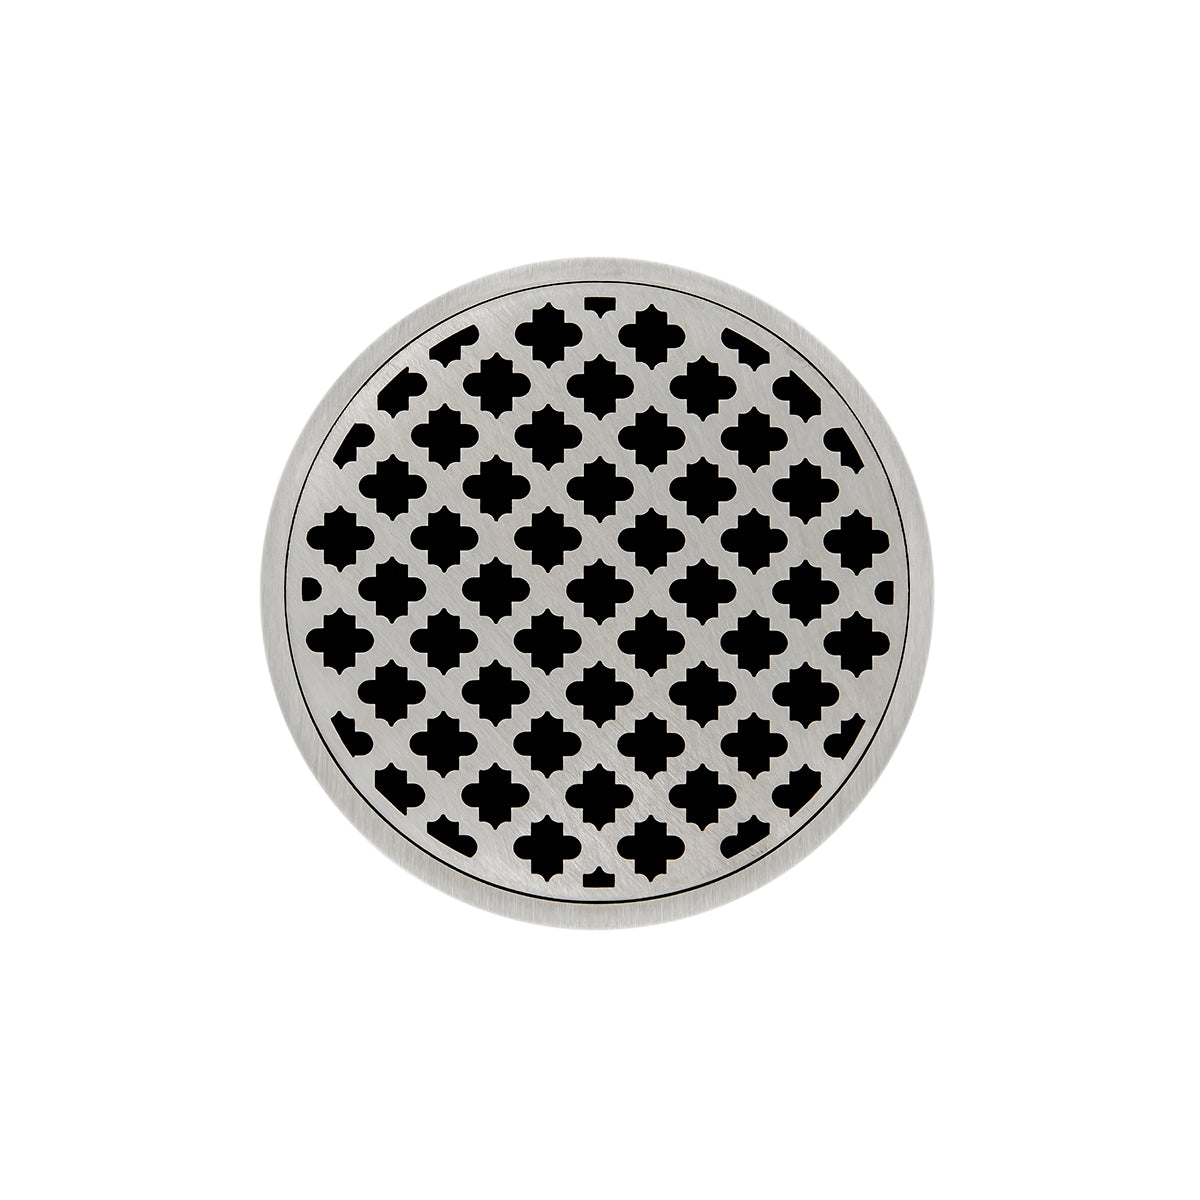 Infinity Drain 5" Round RMD 5 Premium Center Drain Kit with Moor Pattern Decorative Plate with Cast Iron Drain Body, 2" Outlet